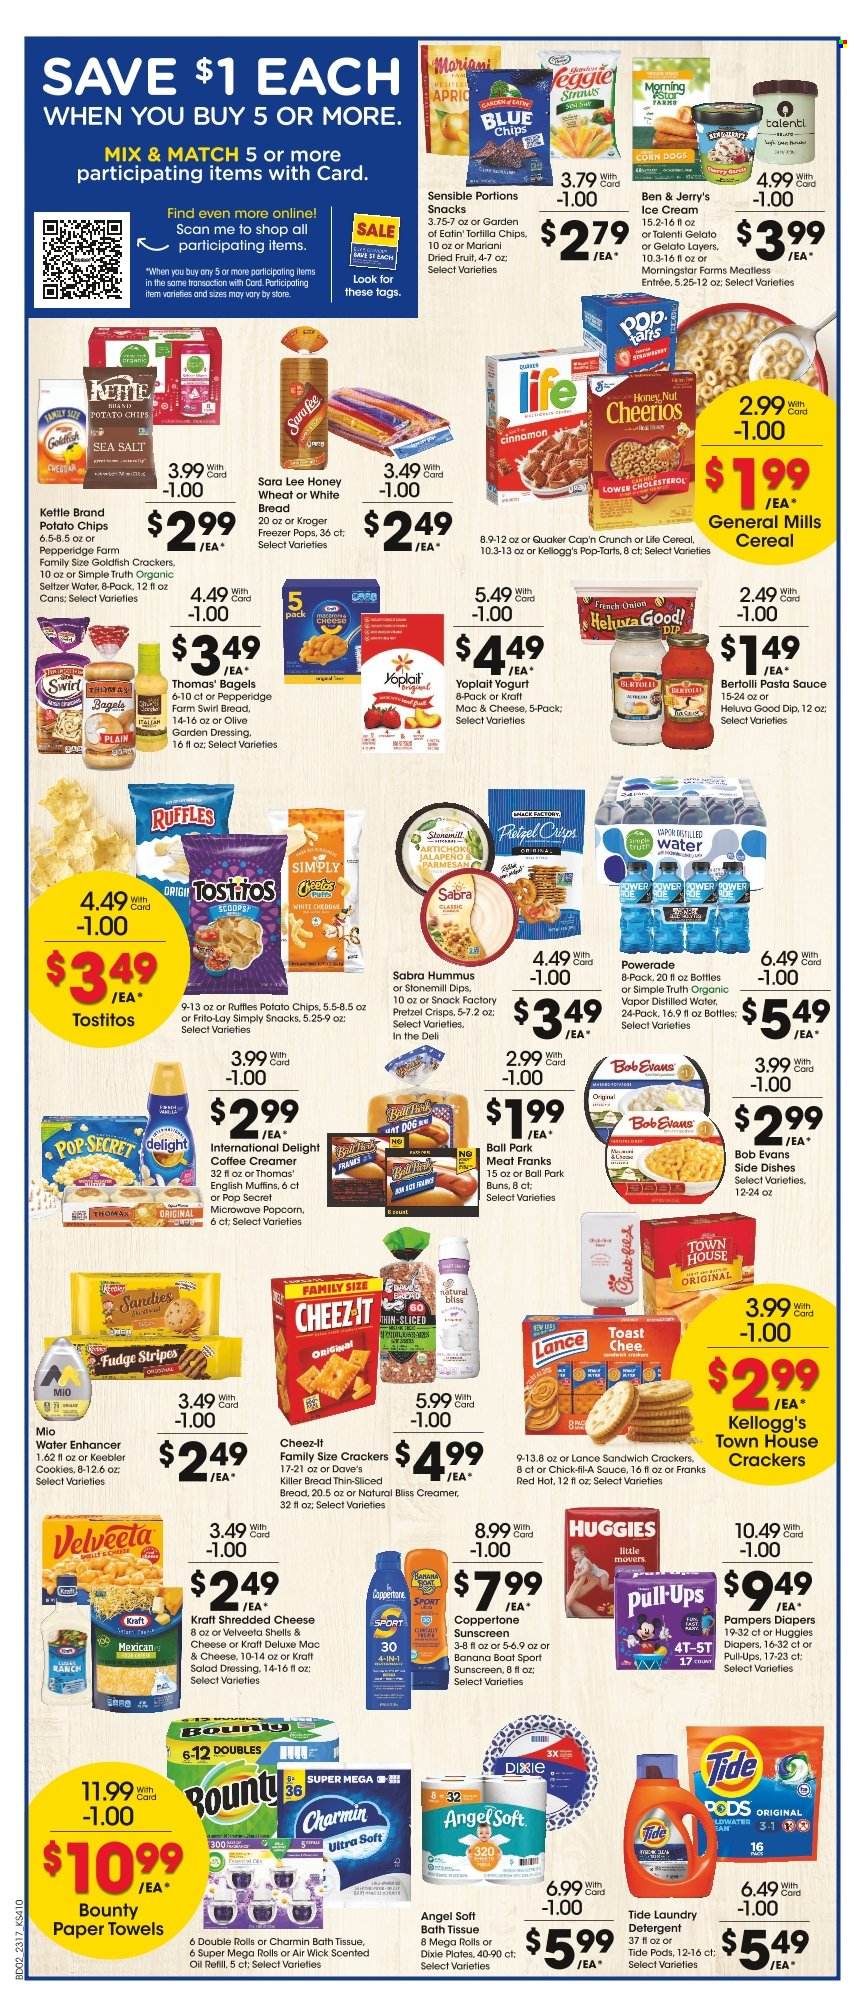 thumbnail - City Market Flyer - 05/24/2023 - 05/30/2023 - Sales products - bagels, english muffins, white bread, buns, Sara Lee, artichoke, onion, jalapeño, pasta sauce, Quaker, MorningStar Farms, Kraft®, Bob Evans, Bertolli, frankfurters, hummus, shredded cheese, parmesan, Yoplait, creamer, dip, ice cream, Ben & Jerry's, Talenti Gelato, gelato, cookies, fudge, Bounty, crackers, Kellogg's, Pop-Tarts, Keebler, tortilla chips, potato chips, chips, popcorn, Goldfish, Frito-Lay, Cheez-It, Ruffles, Tostitos, pretzel crisps, salty snack, cereals, Cheerios, Cap'n Crunch, cinnamon, salad dressing, dressing, syrup, dried fruit, Powerade, energy drink, seltzer water, Huggies, Pampers, nappies, bath tissue, kitchen towels, paper towels, Charmin, detergent, Tide, laundry detergent, Dixie, plate, Air Wick, scented oil, tank, boat, distilled water. Page 3.